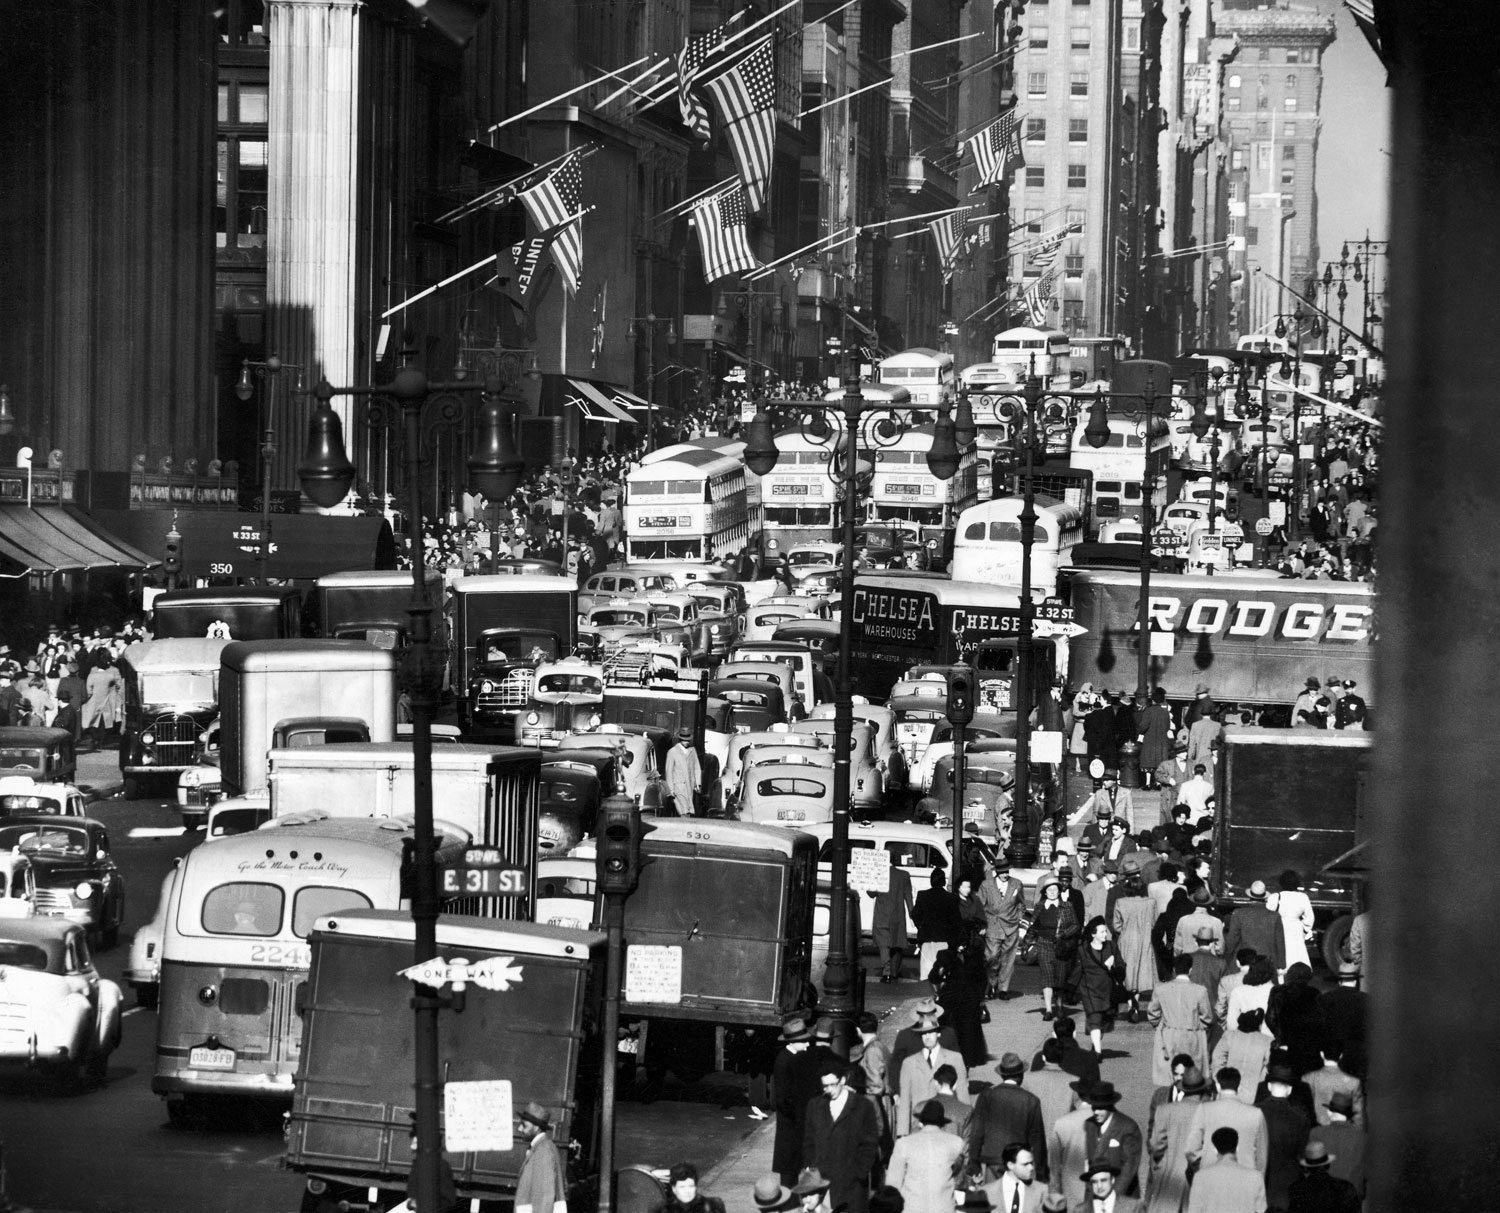 Pre-Christmas holiday traffic teaming with double-decker buses, trucks and cars, crawling along two-way-laned, 5th avenue near 34th street in November 1948.